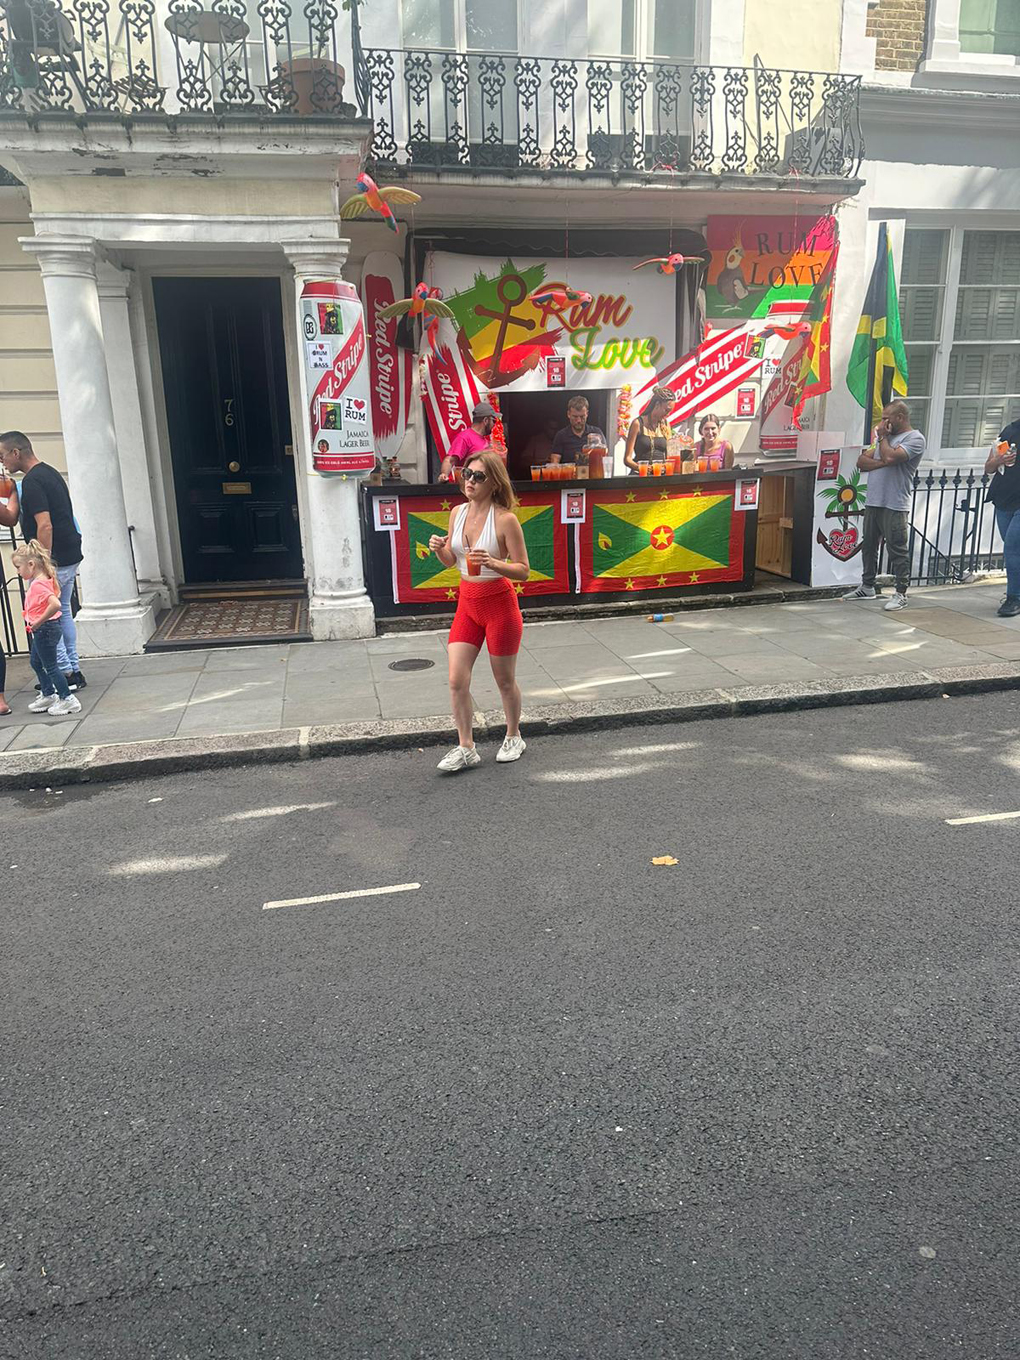 A very colourful stand and seller selling rum at the Notting Hill carnival.